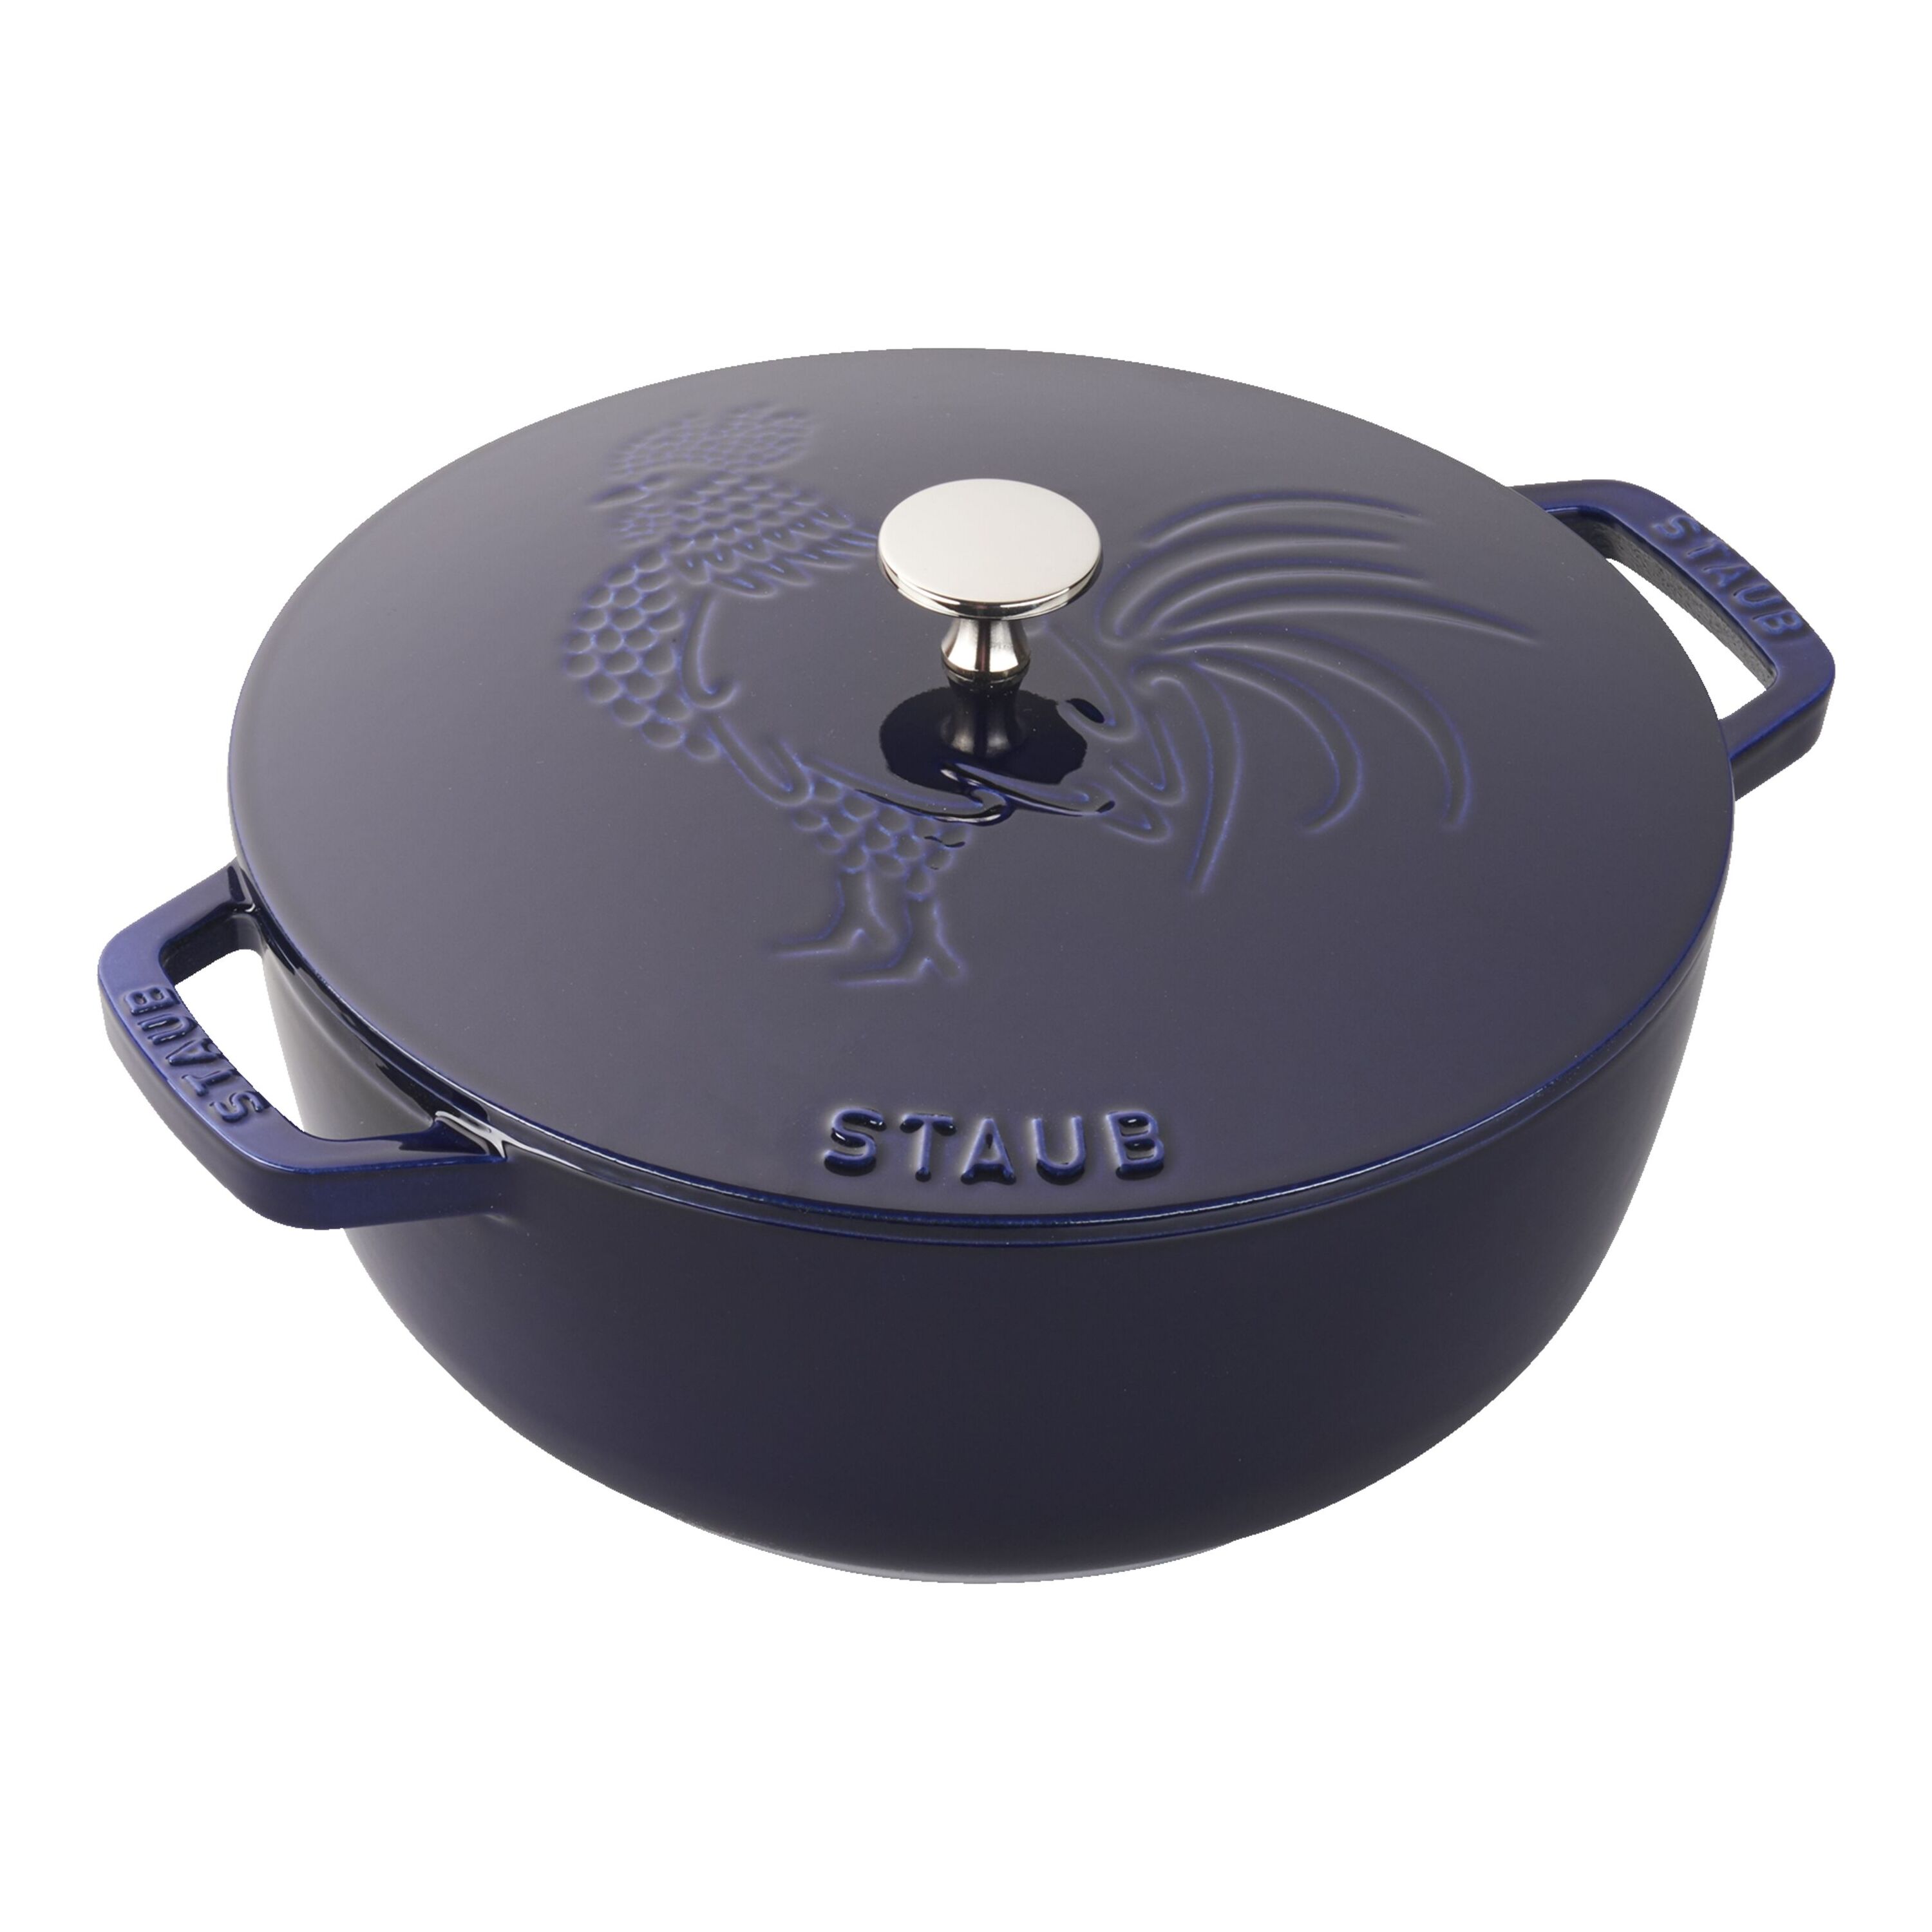 Staub - multifunctional roaster with curved glass lid, round, 28 cm, 127228